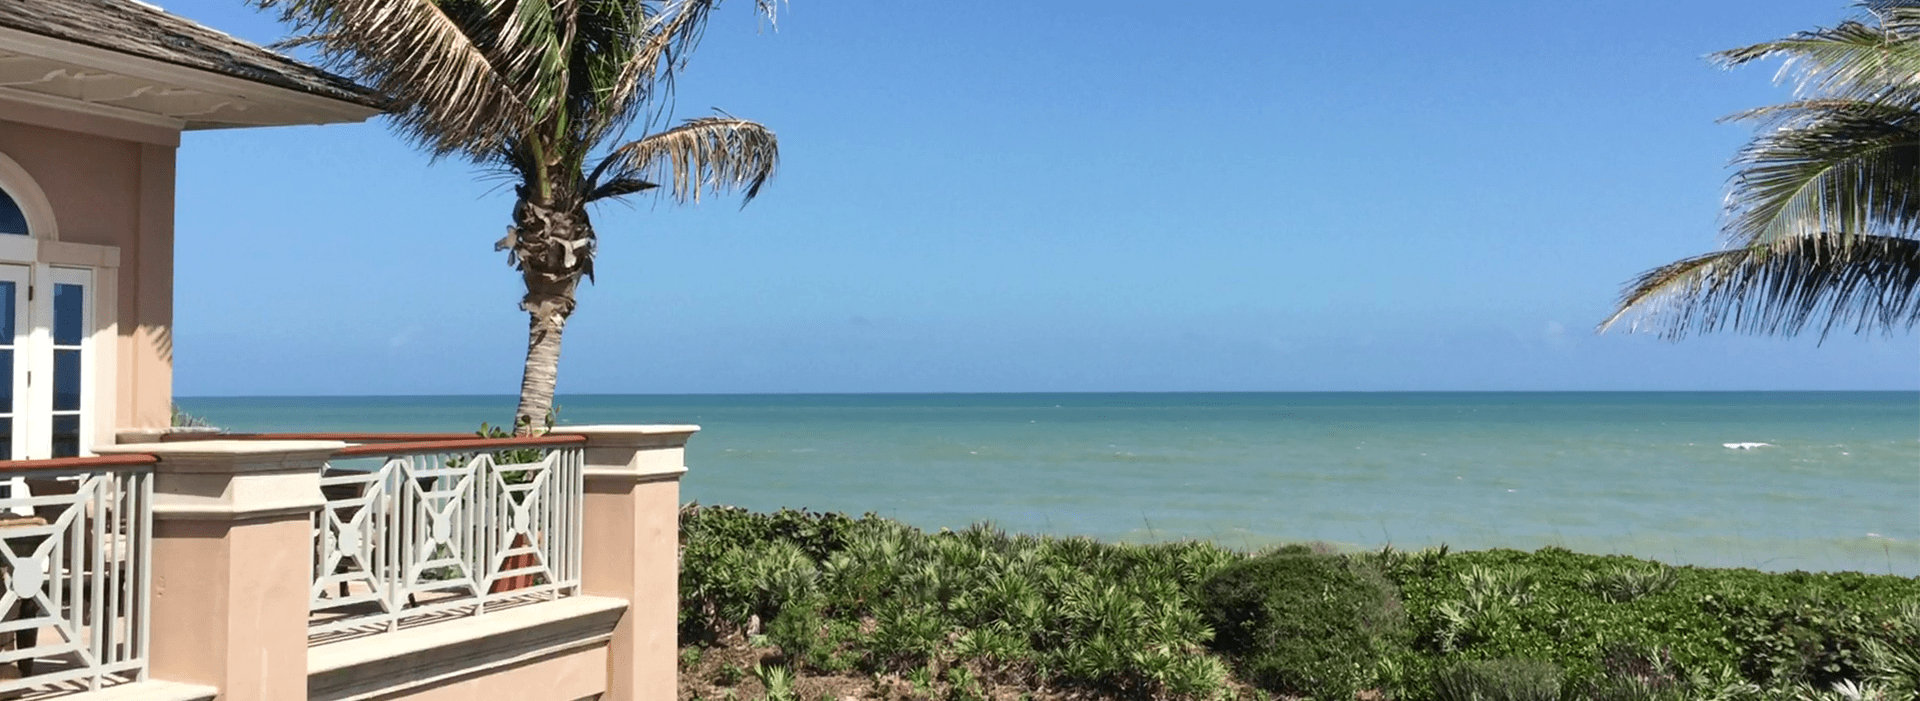 Orchid Island has the best views in Vero Beach Florida